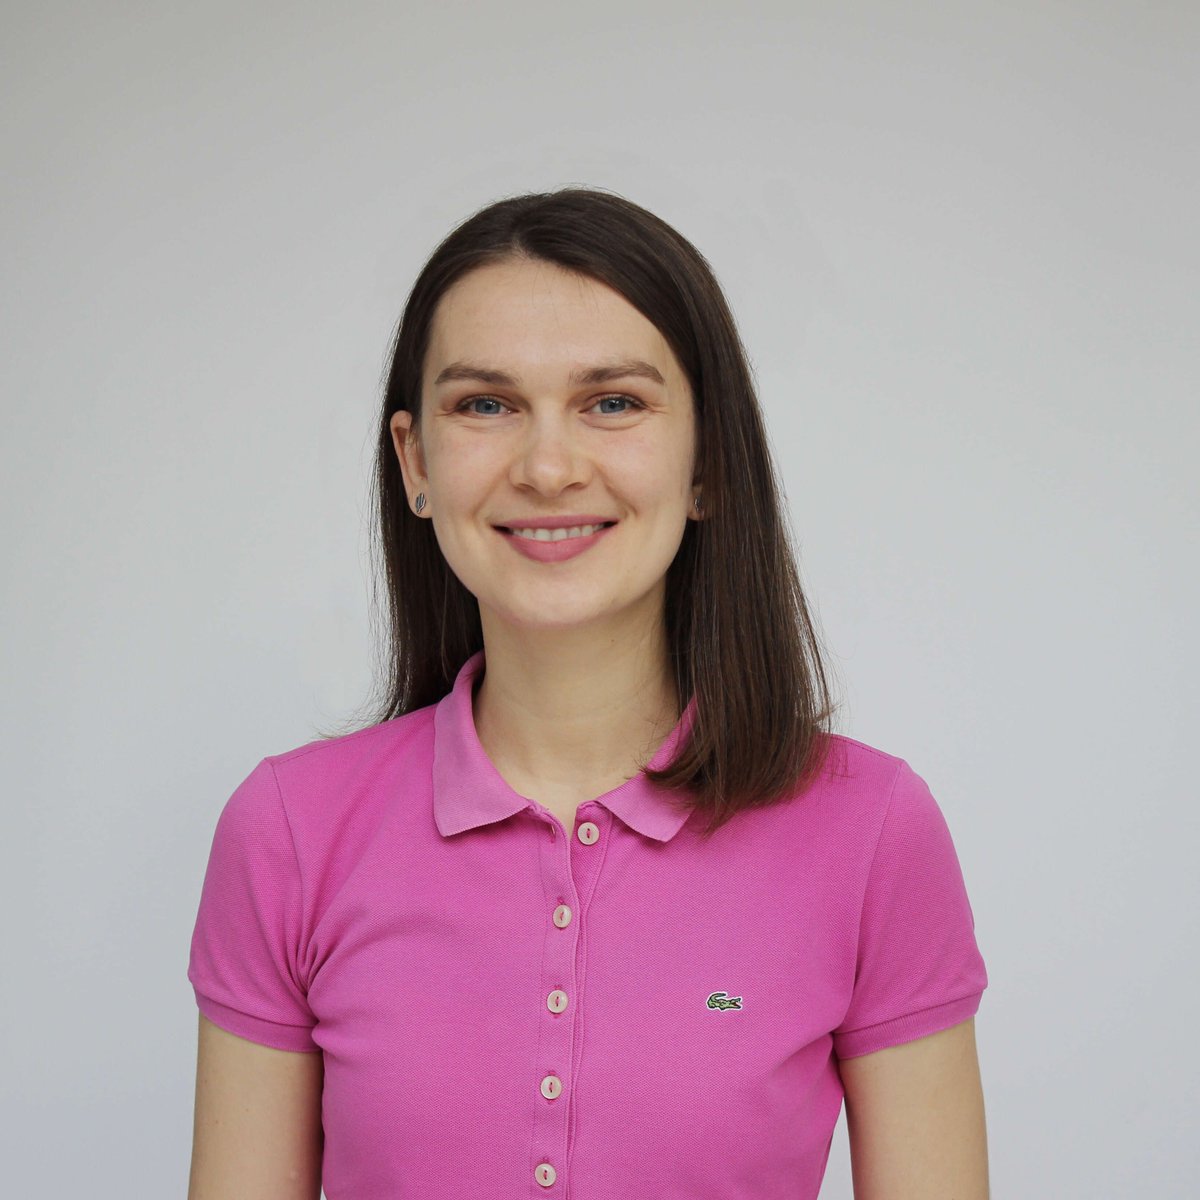 🔥MSCA for 🇺🇦 Fellowship🔥

We are proud to announce that our #postdoc Marichka @zlatohurska was awarded the fellowship from the #MSCA4Ukraine program to support her scientific career at @CEITEC_Brno

Congratulation! 👏

@SAR_Europe @Inspire_MSCA @MSCActions #ScienceForUkraine